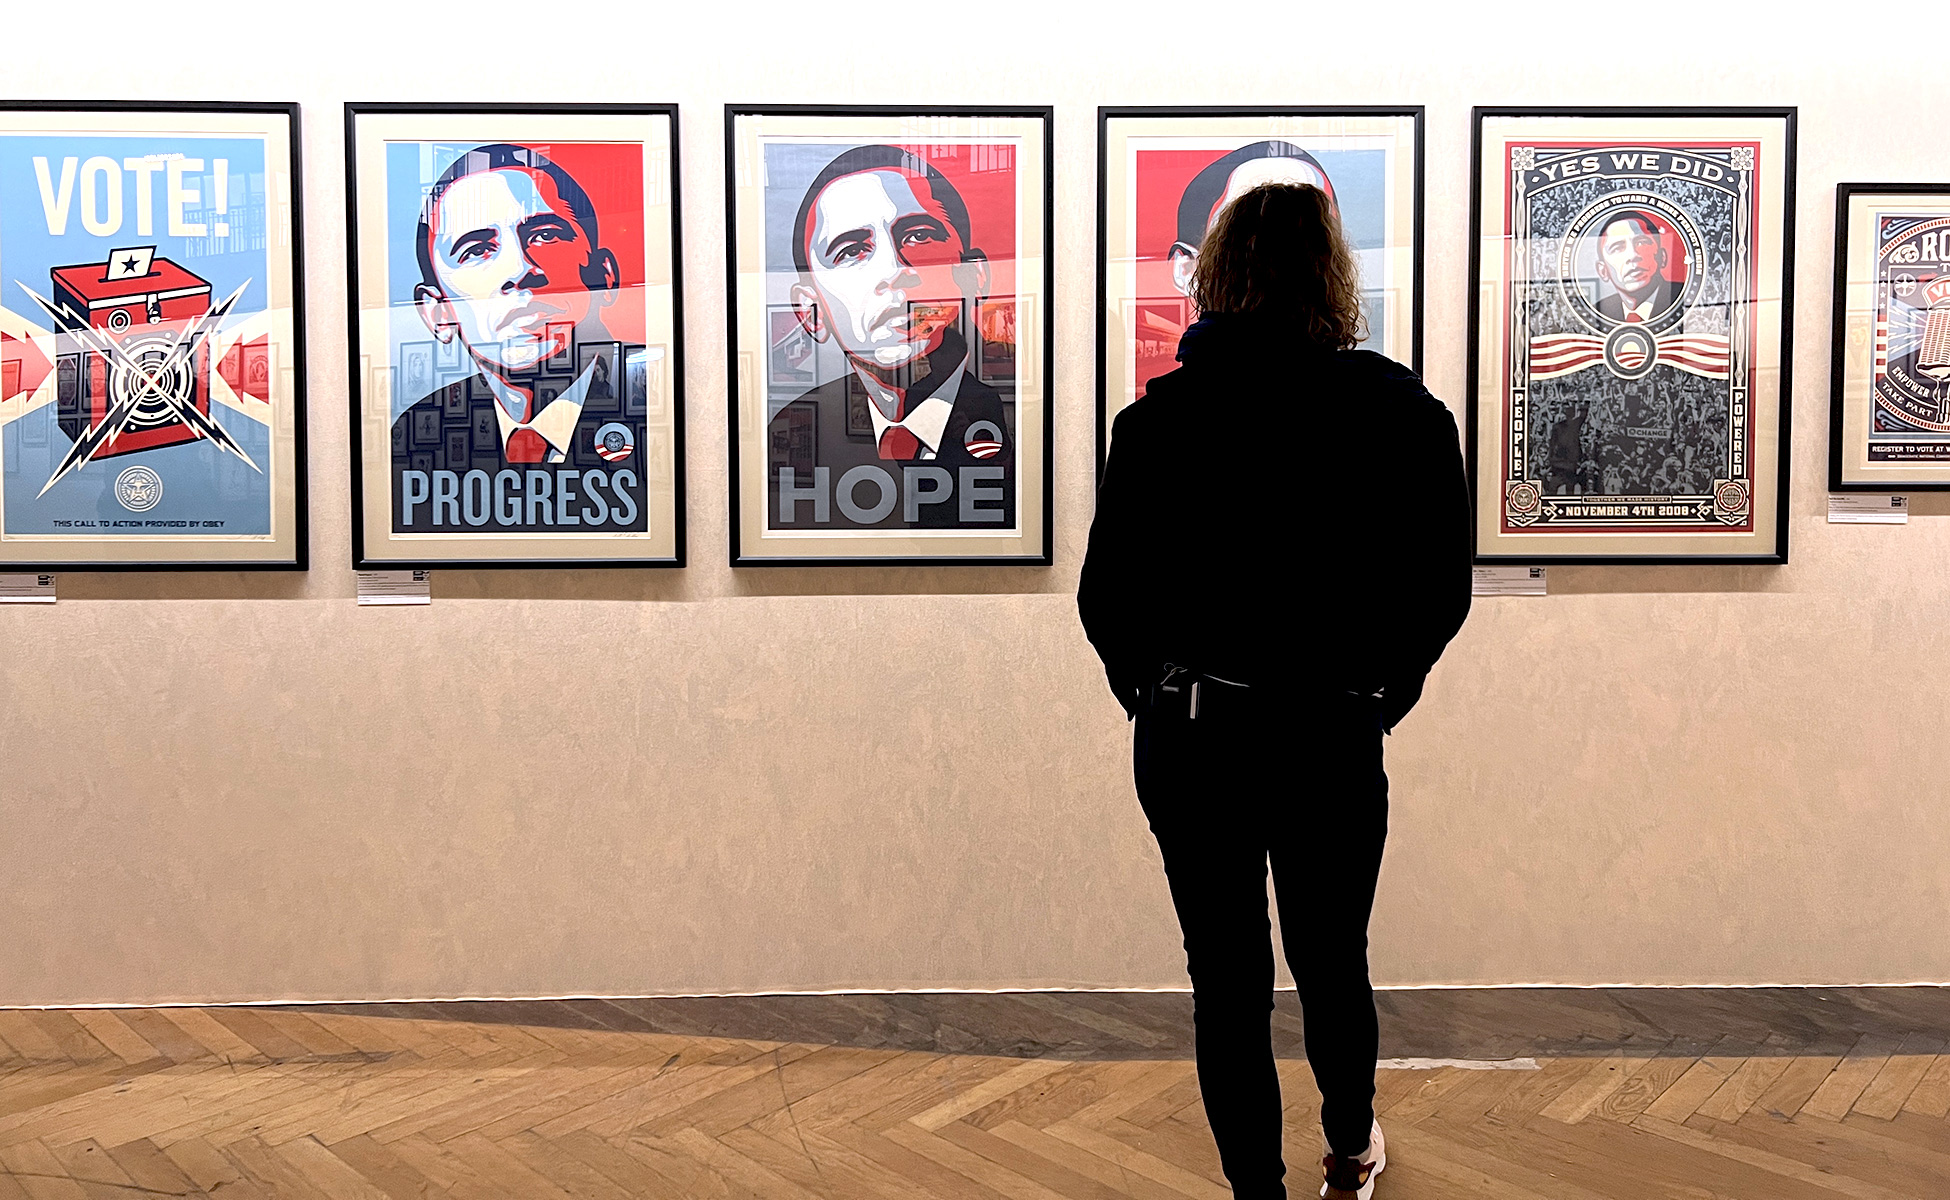 shepard-fairey-obey-obama-hope-expo-musee-guimet